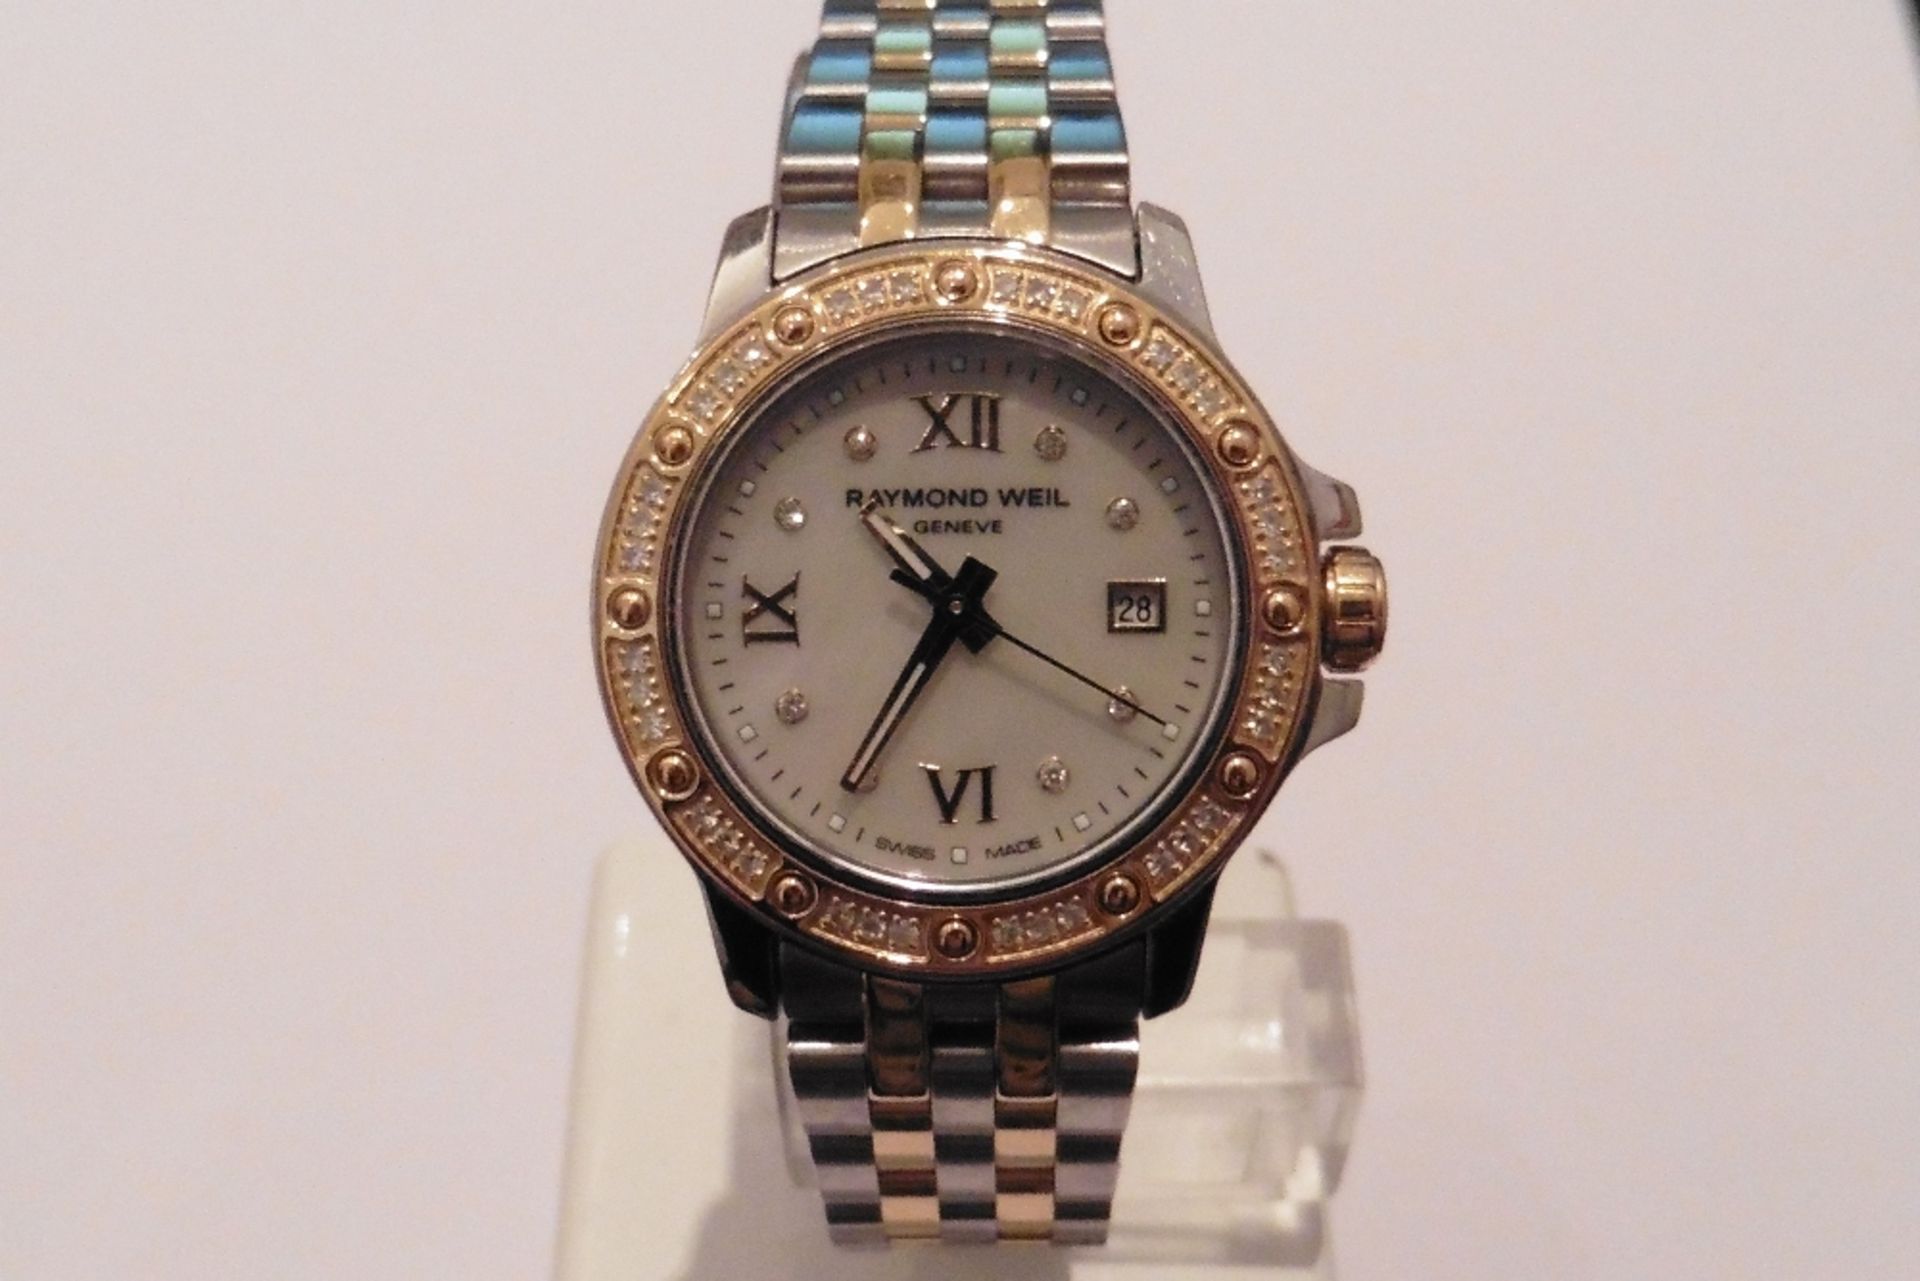 Pre-owned ladies Raymond Weil watch, model number 5399.  Stainless steel with gold plating. Has brac